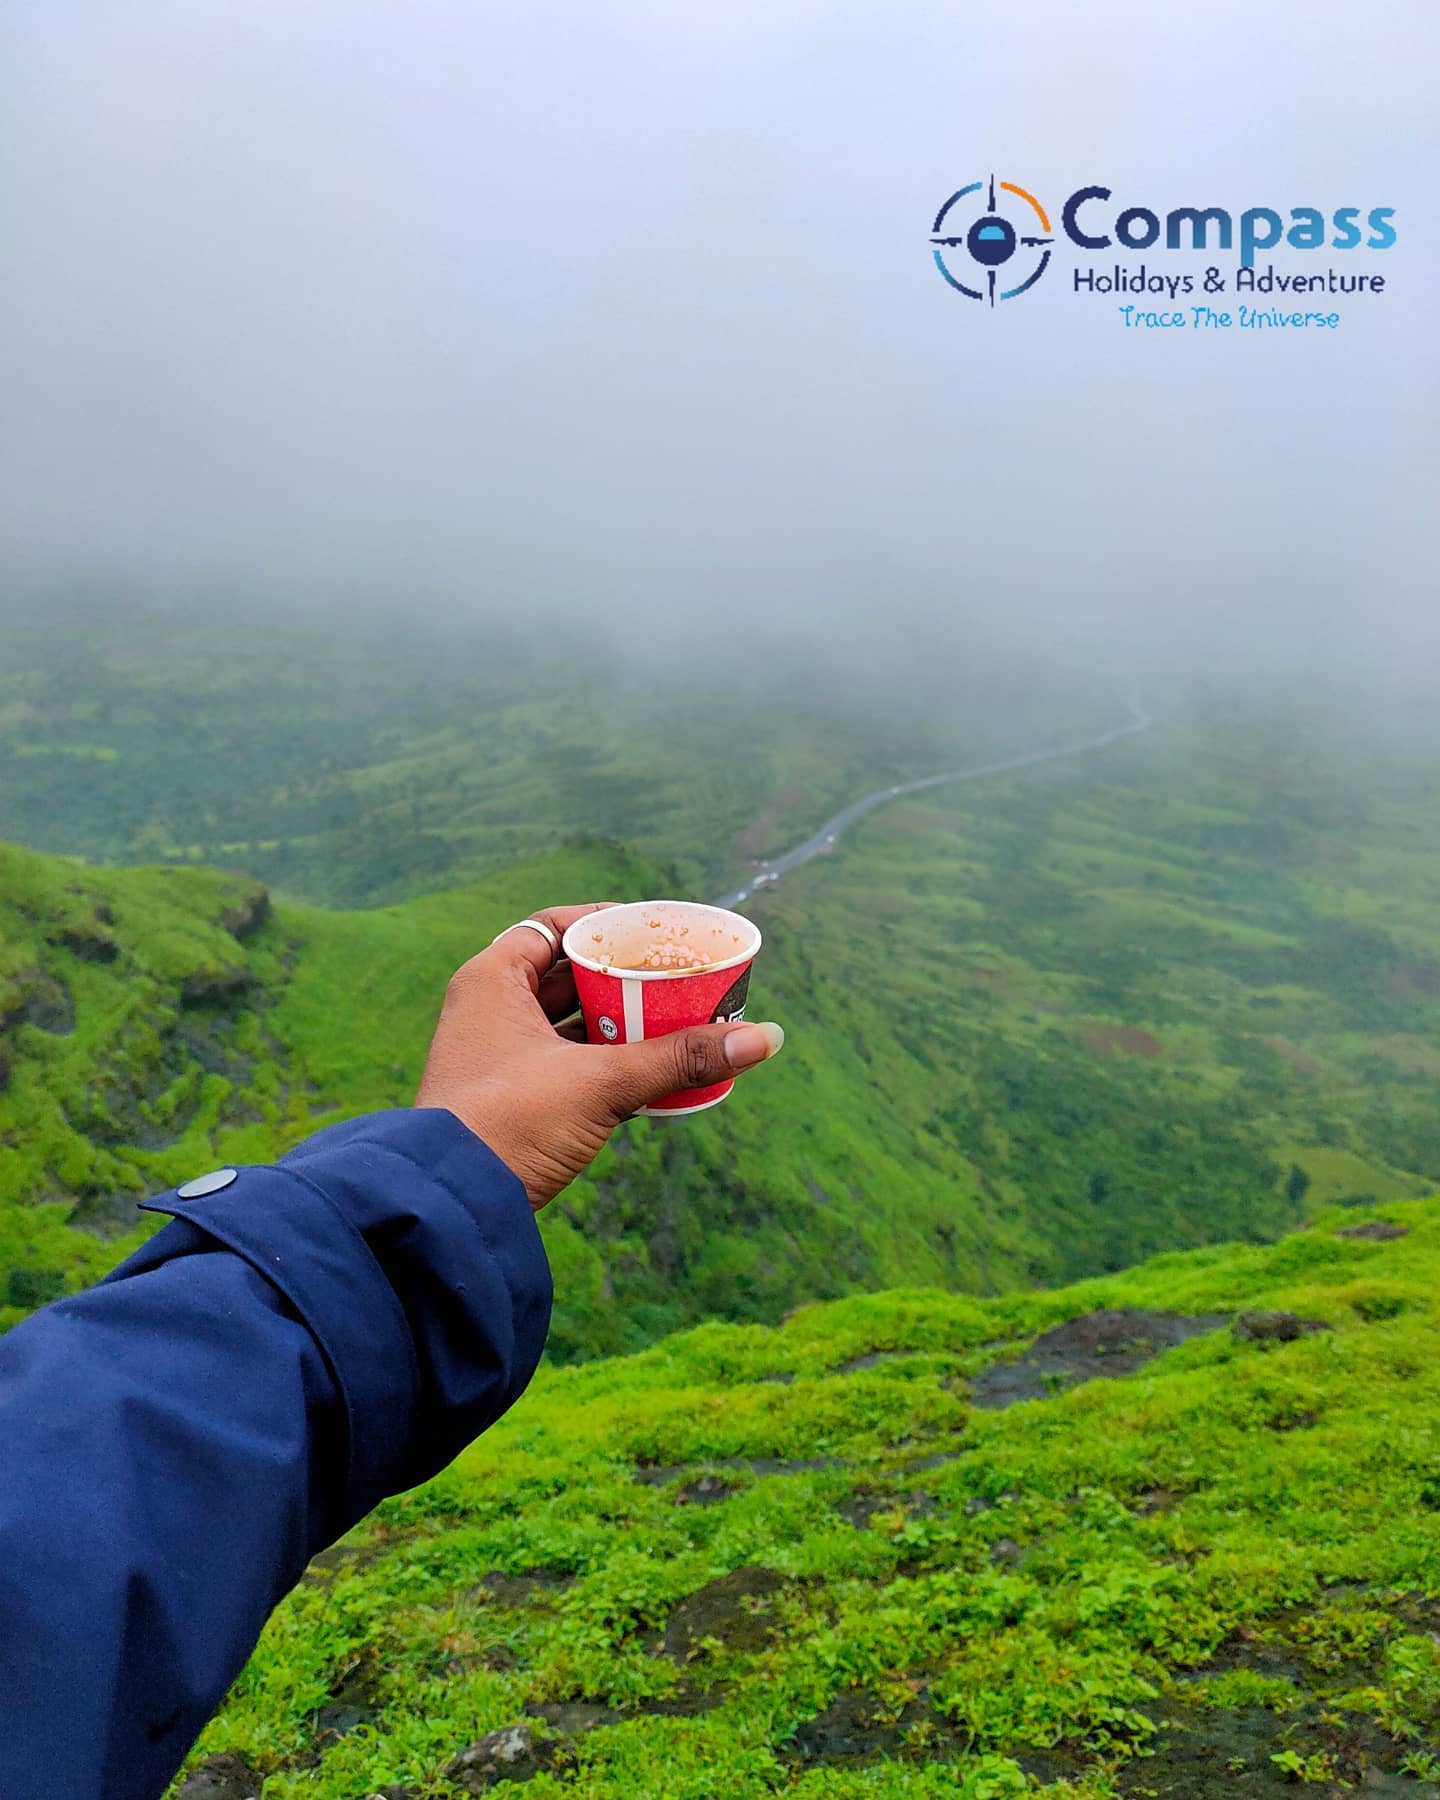 There is nothing quite like a cup of hot tea while trekking up the hills.
.
.
.
